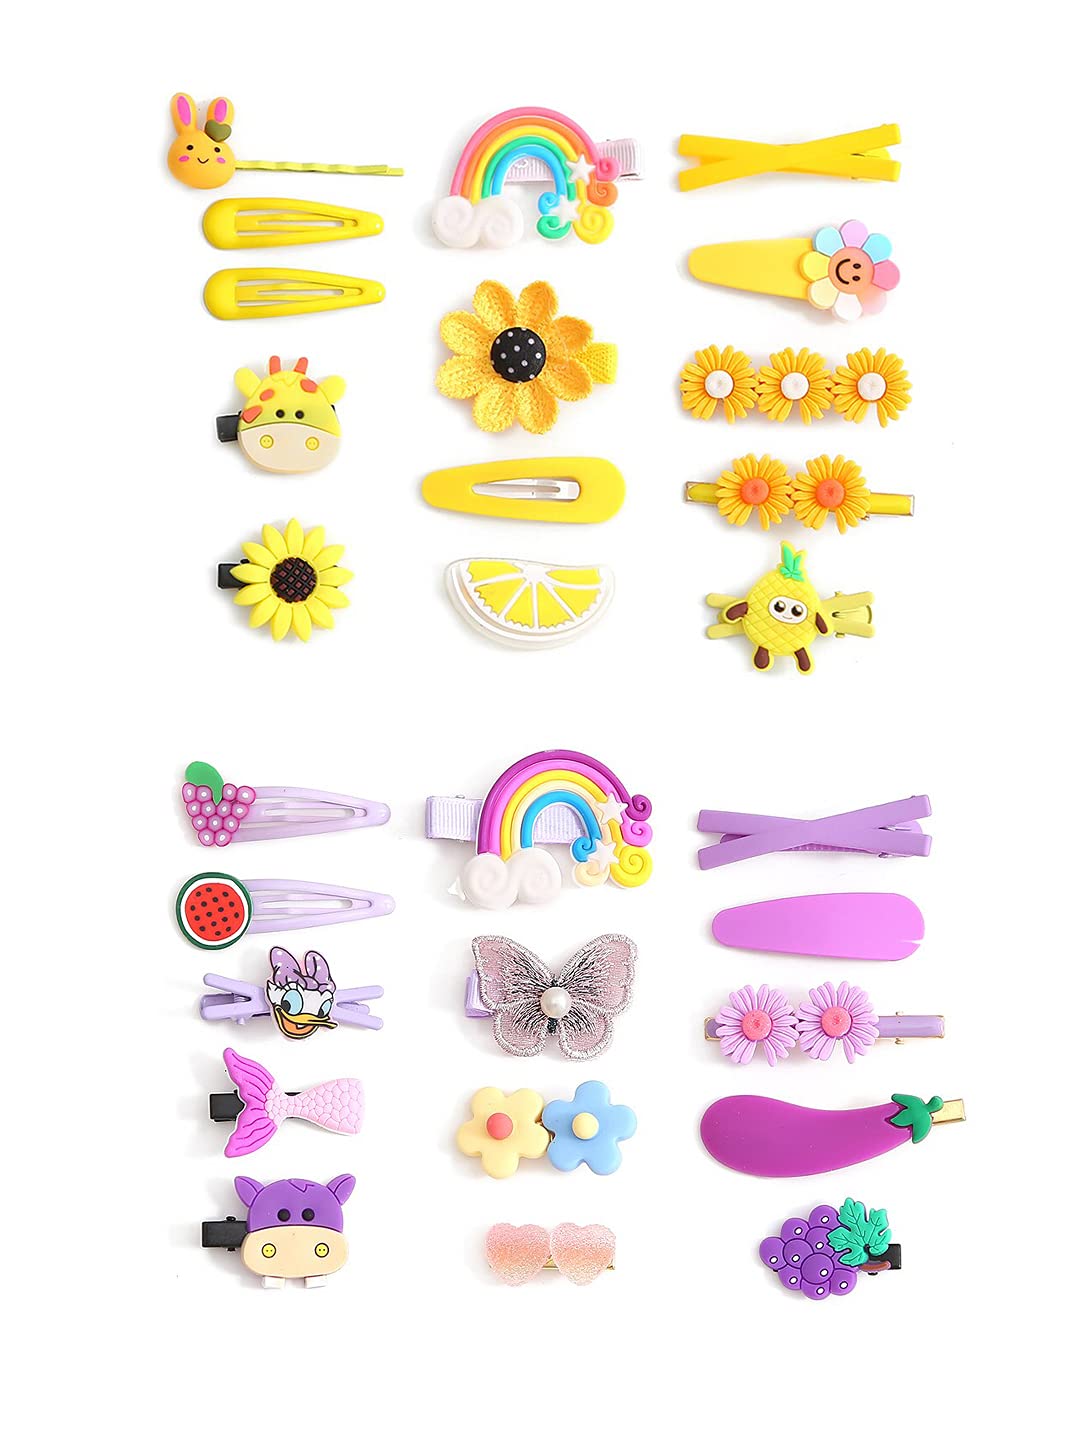 Melbees by Yellow Chimes Hair Clips for Girls Kids Hair Clip Hair Accessories For Girls Cute Characters Pretty Tiny Hair Clips for Baby Girls 28 Pcs Yellow Alligator Clips for Hair Baby Hair Clips